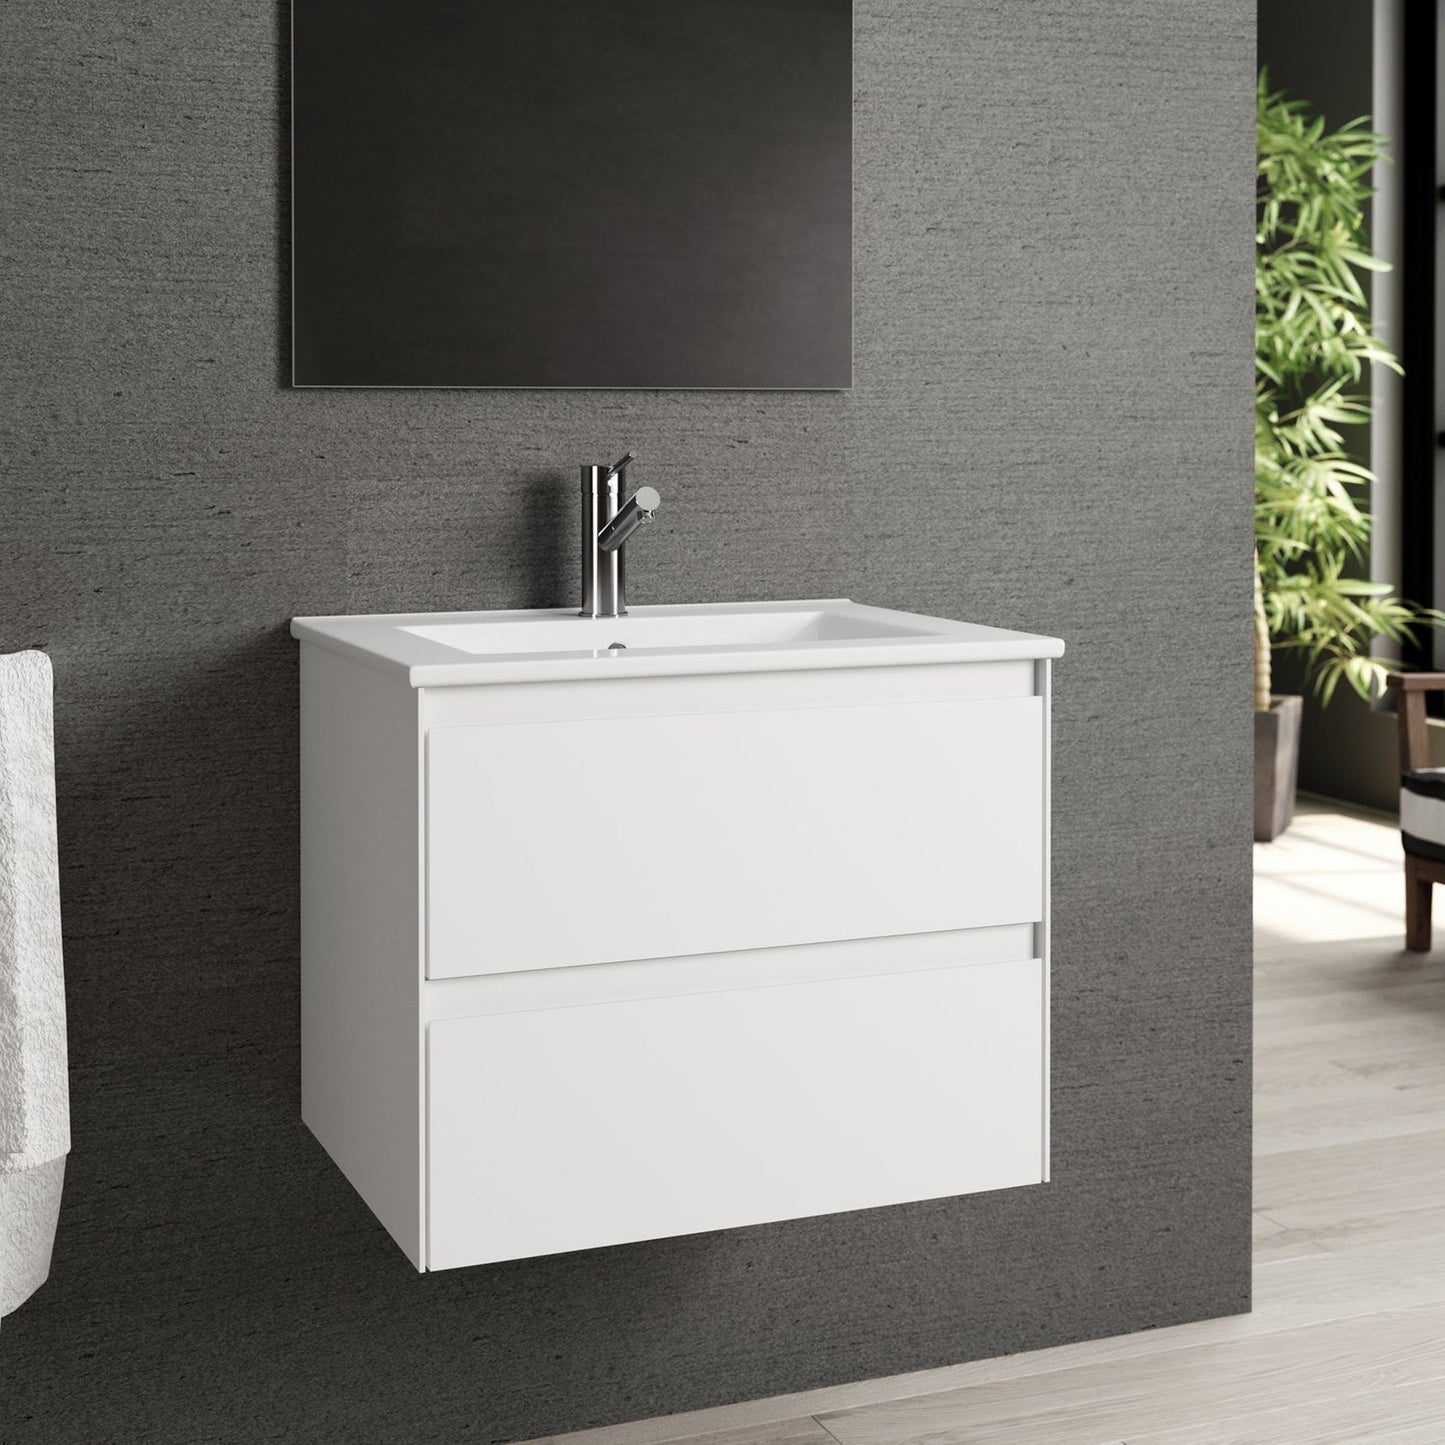 Eviva Bloom 24" x 34" Matte White Wall-Mounted Bathroom Vanity With White Single Integrated Porcelain Sink